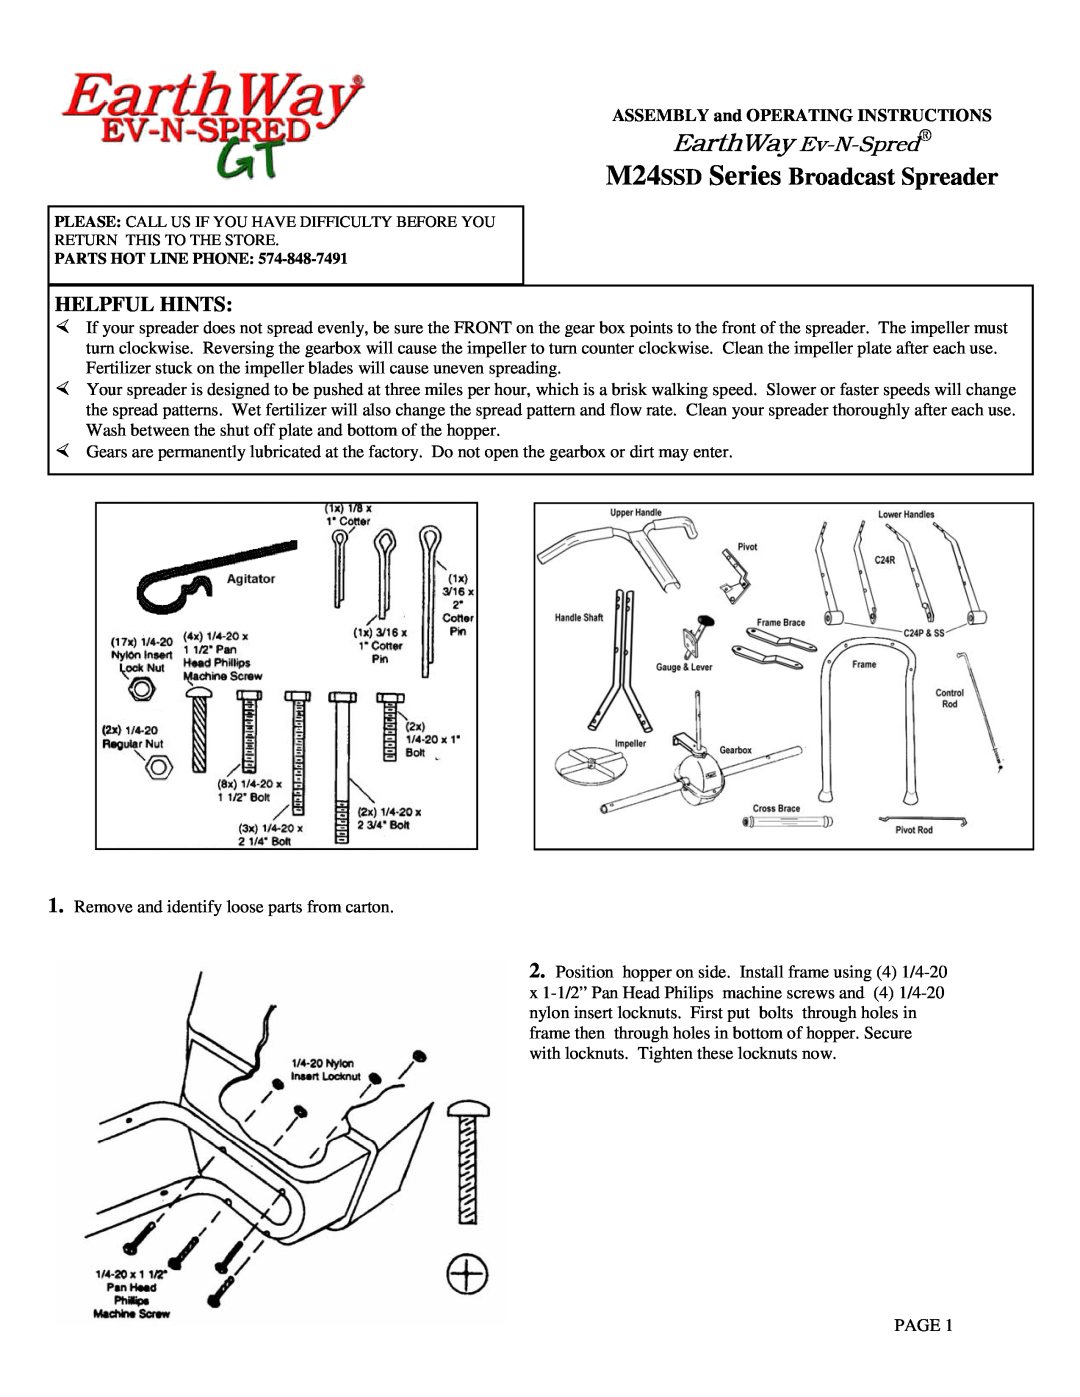 Hitachi manual M24SSD Series Broadcast Spreader, Helpful Hints, ASSEMBLY and OPERATING INSTRUCTIONS 